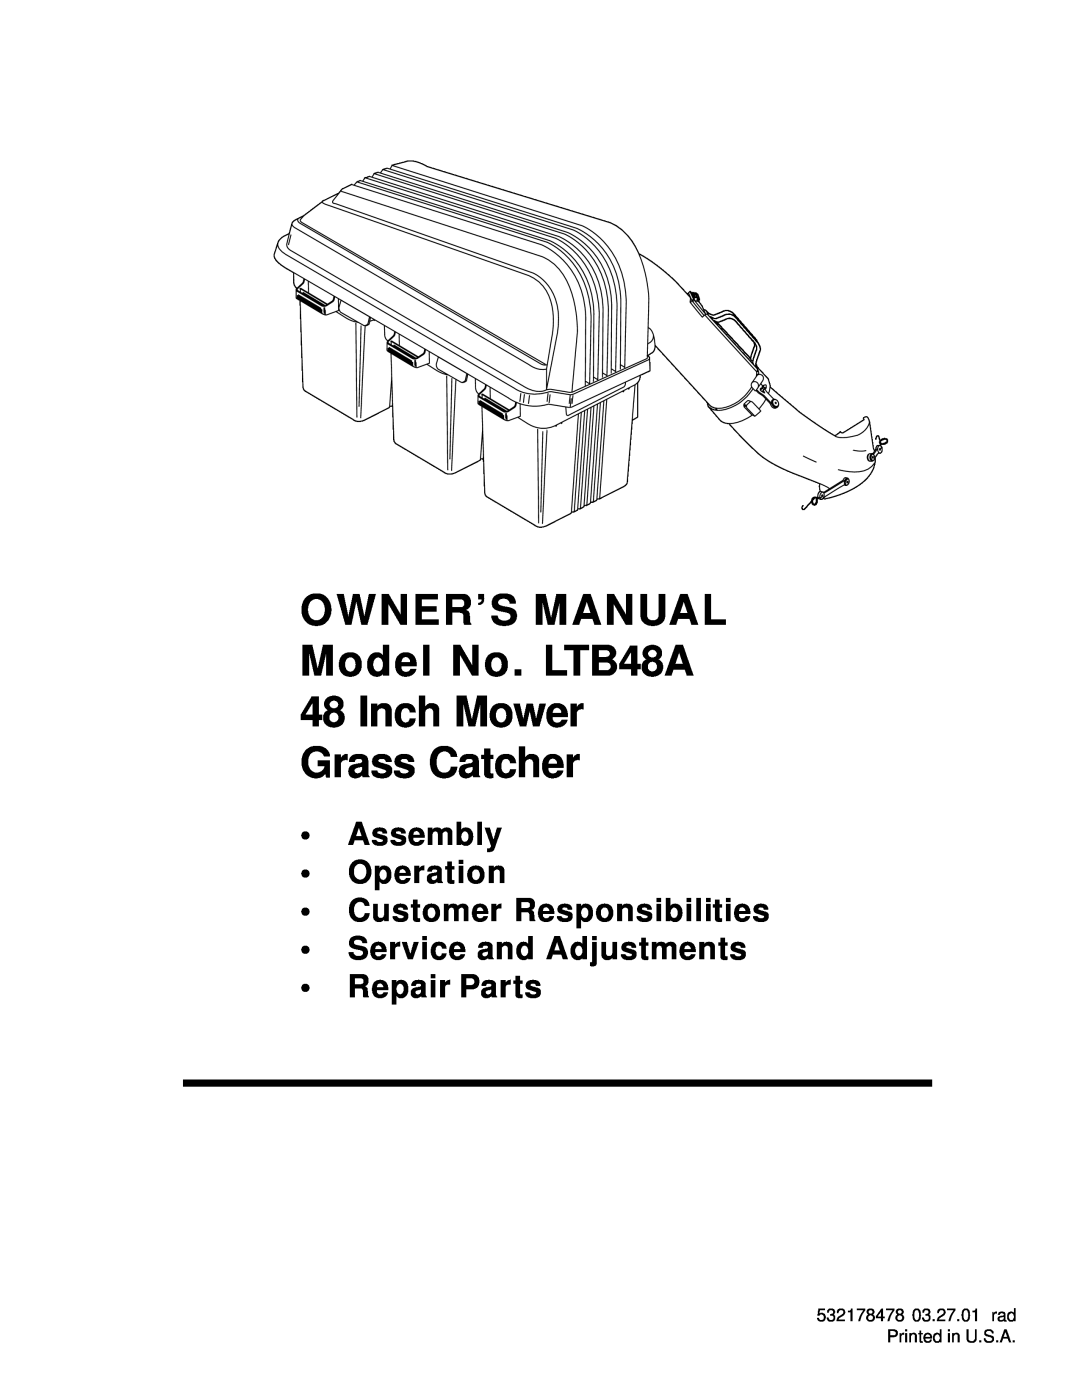 Husqvarna LTB48A owner manual Assembly Operation Customer Responsibilities Service and Adjustments, Repair Parts 